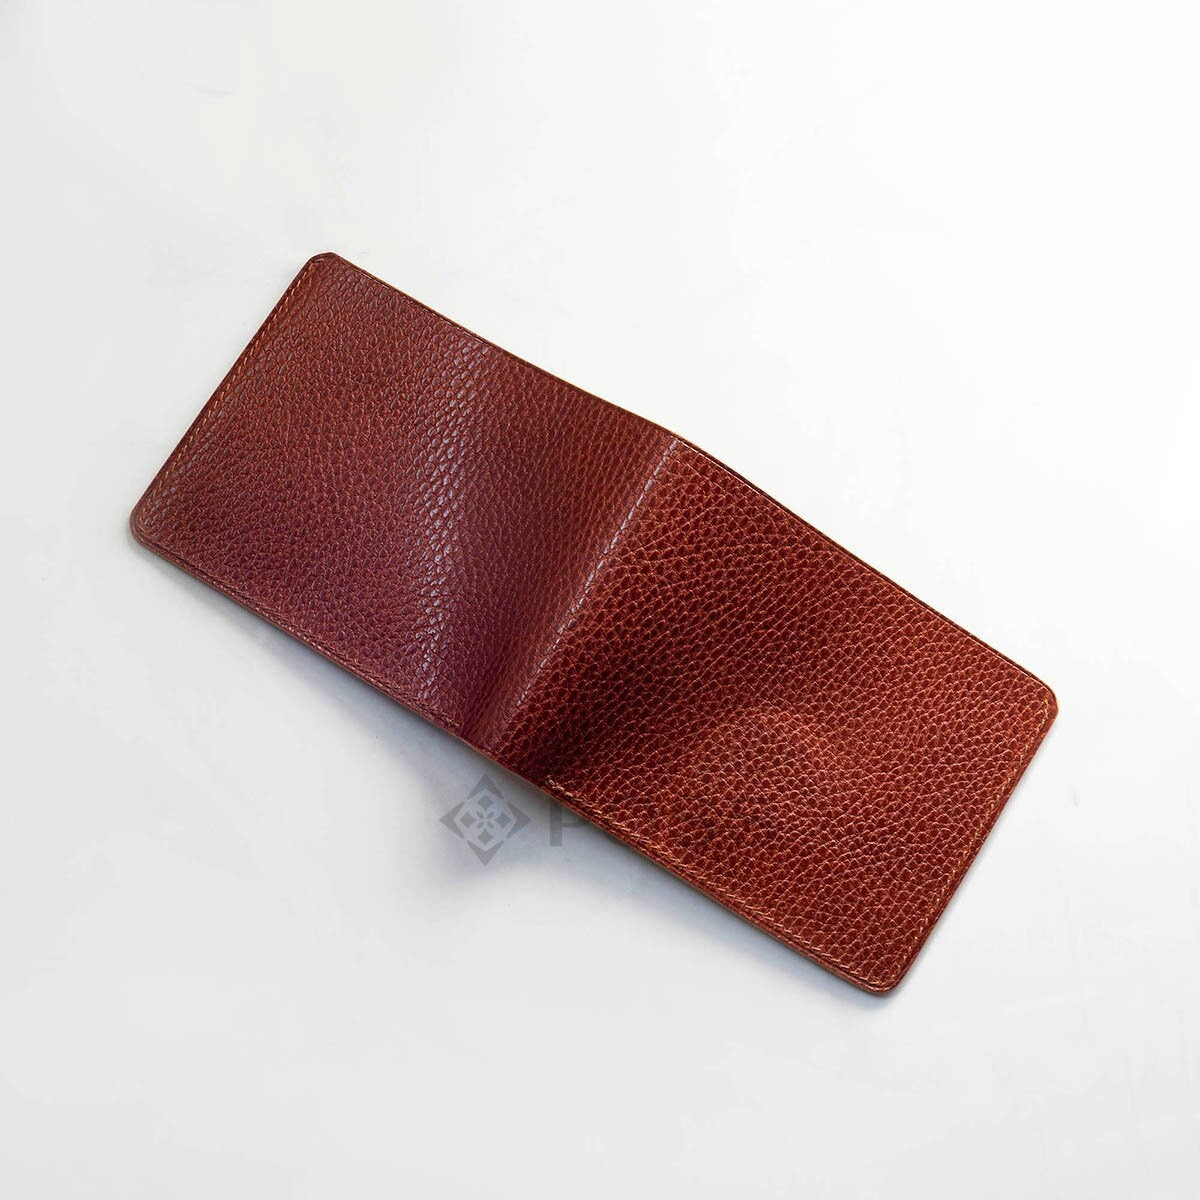 Traditional Bifold I made with Epi and Saffiano Leather. : r/wallets